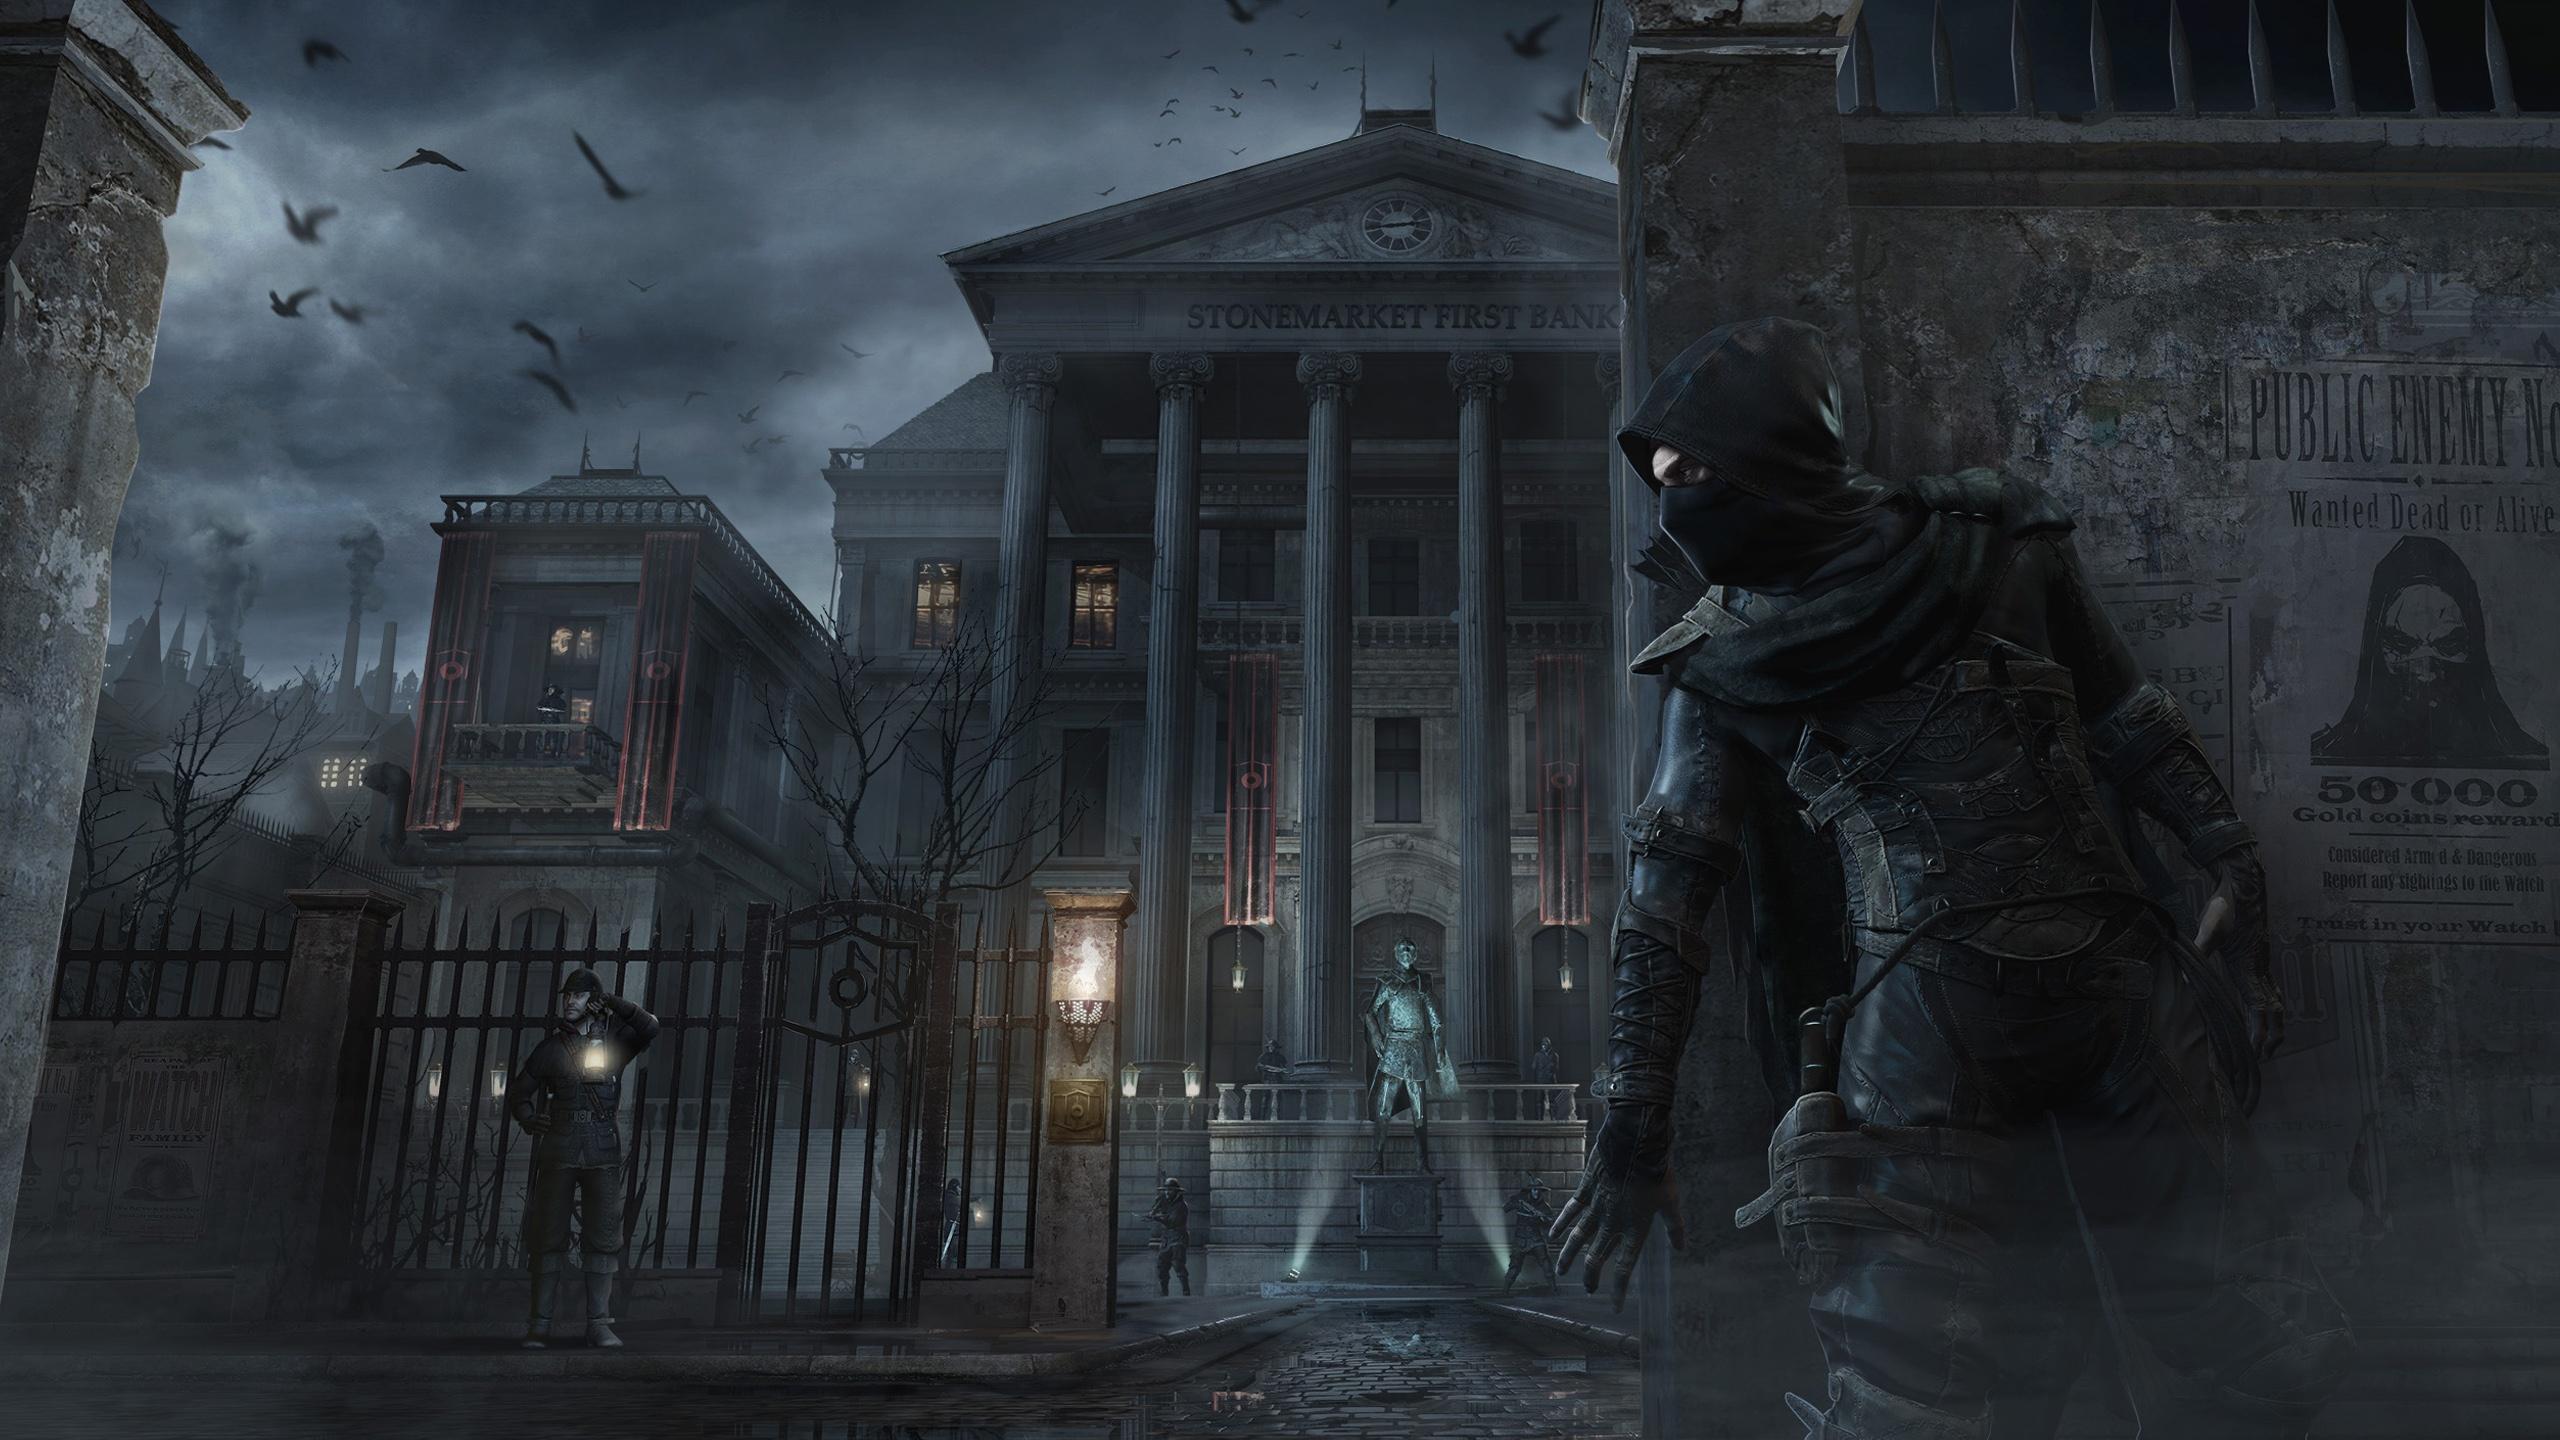 Thief Bank Heist Mission Wallpaper in jpg format for free download